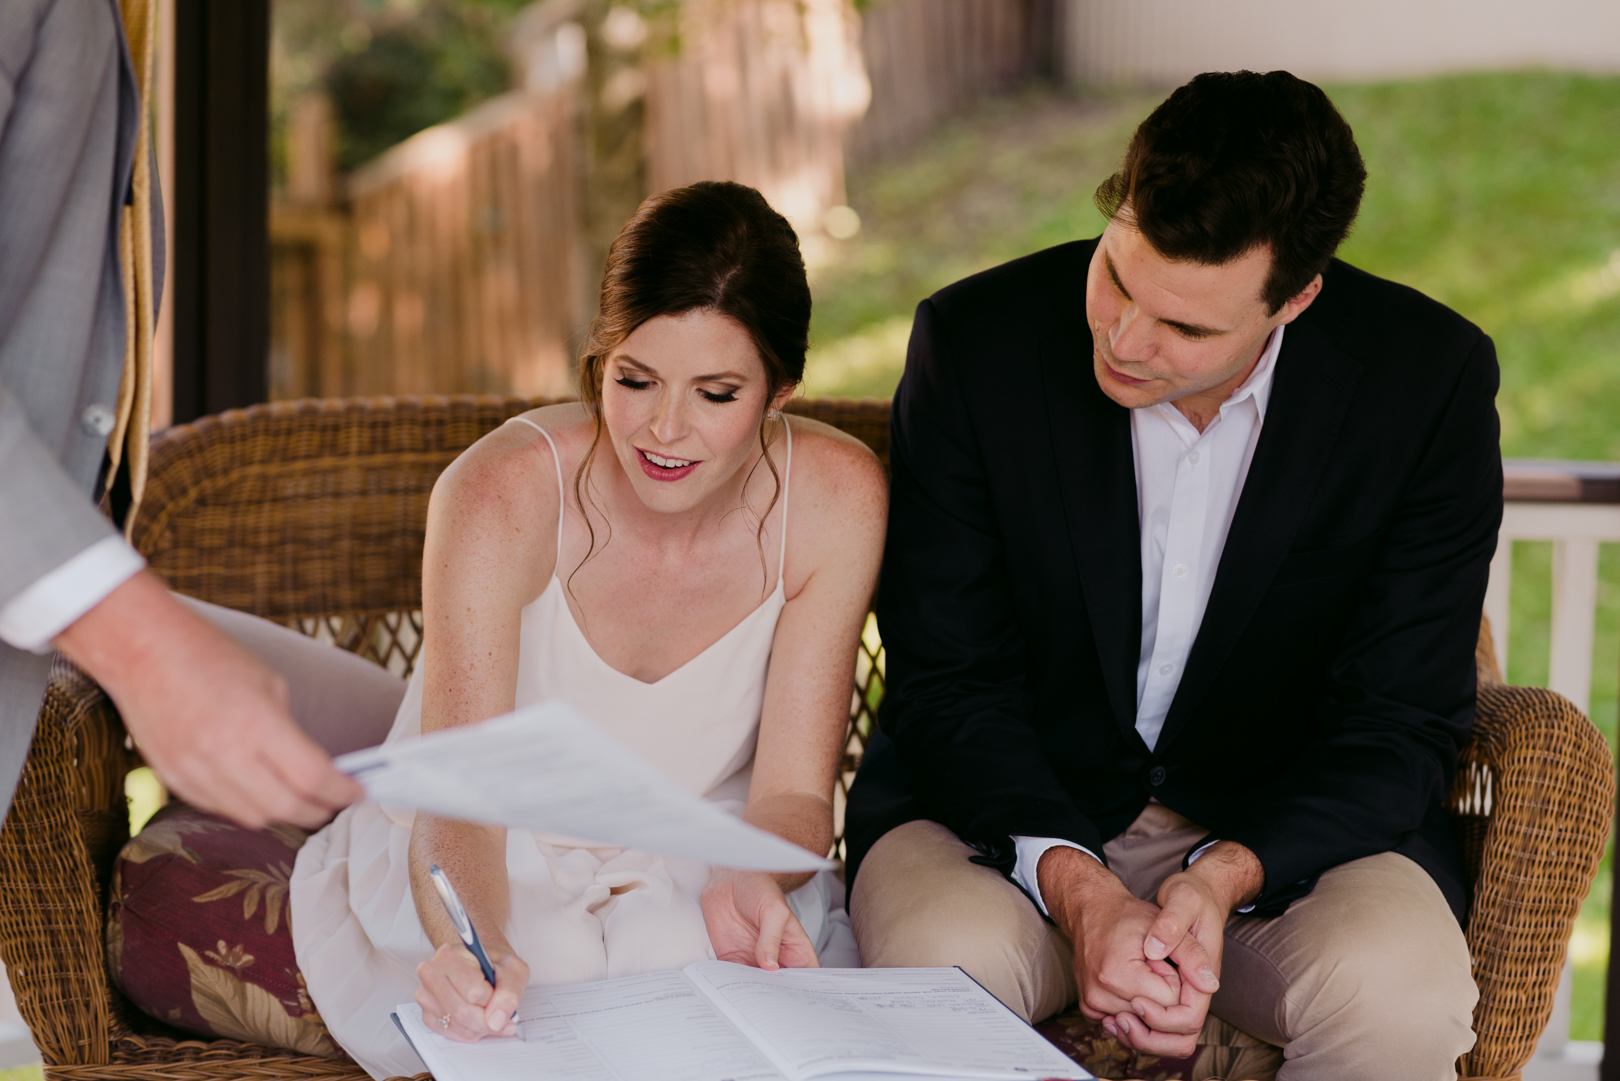 bride and groom signing marriage license during backyard wedding ceremony